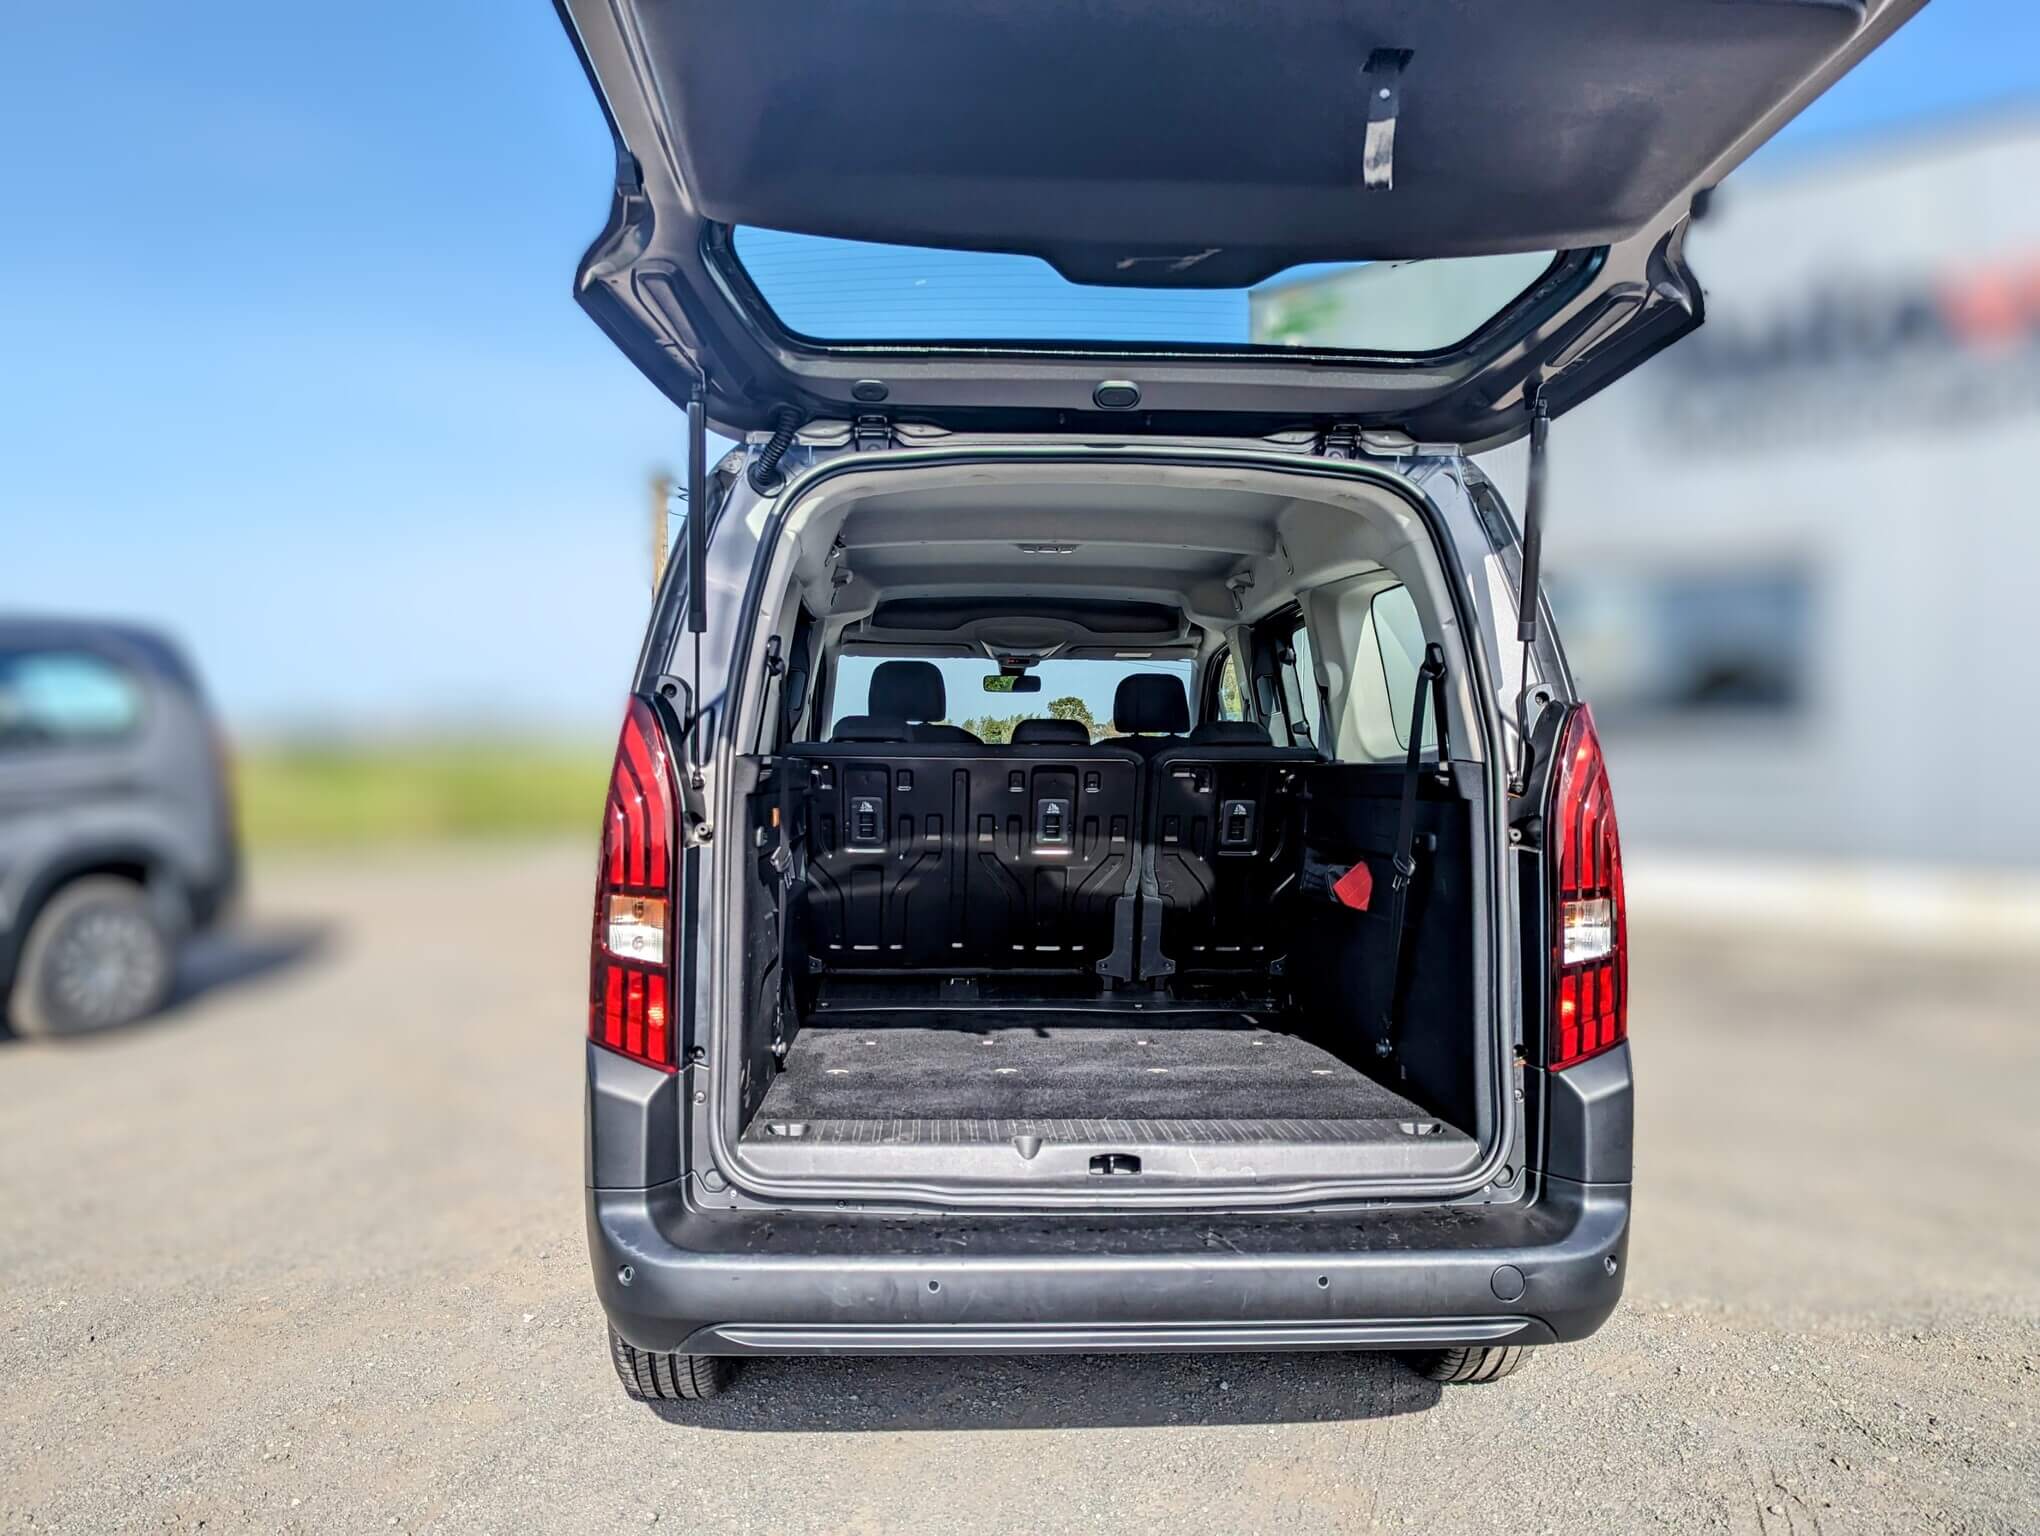 Practical luggage compartment of the Peugeot Rifter at Autoverhuur Meerschaert